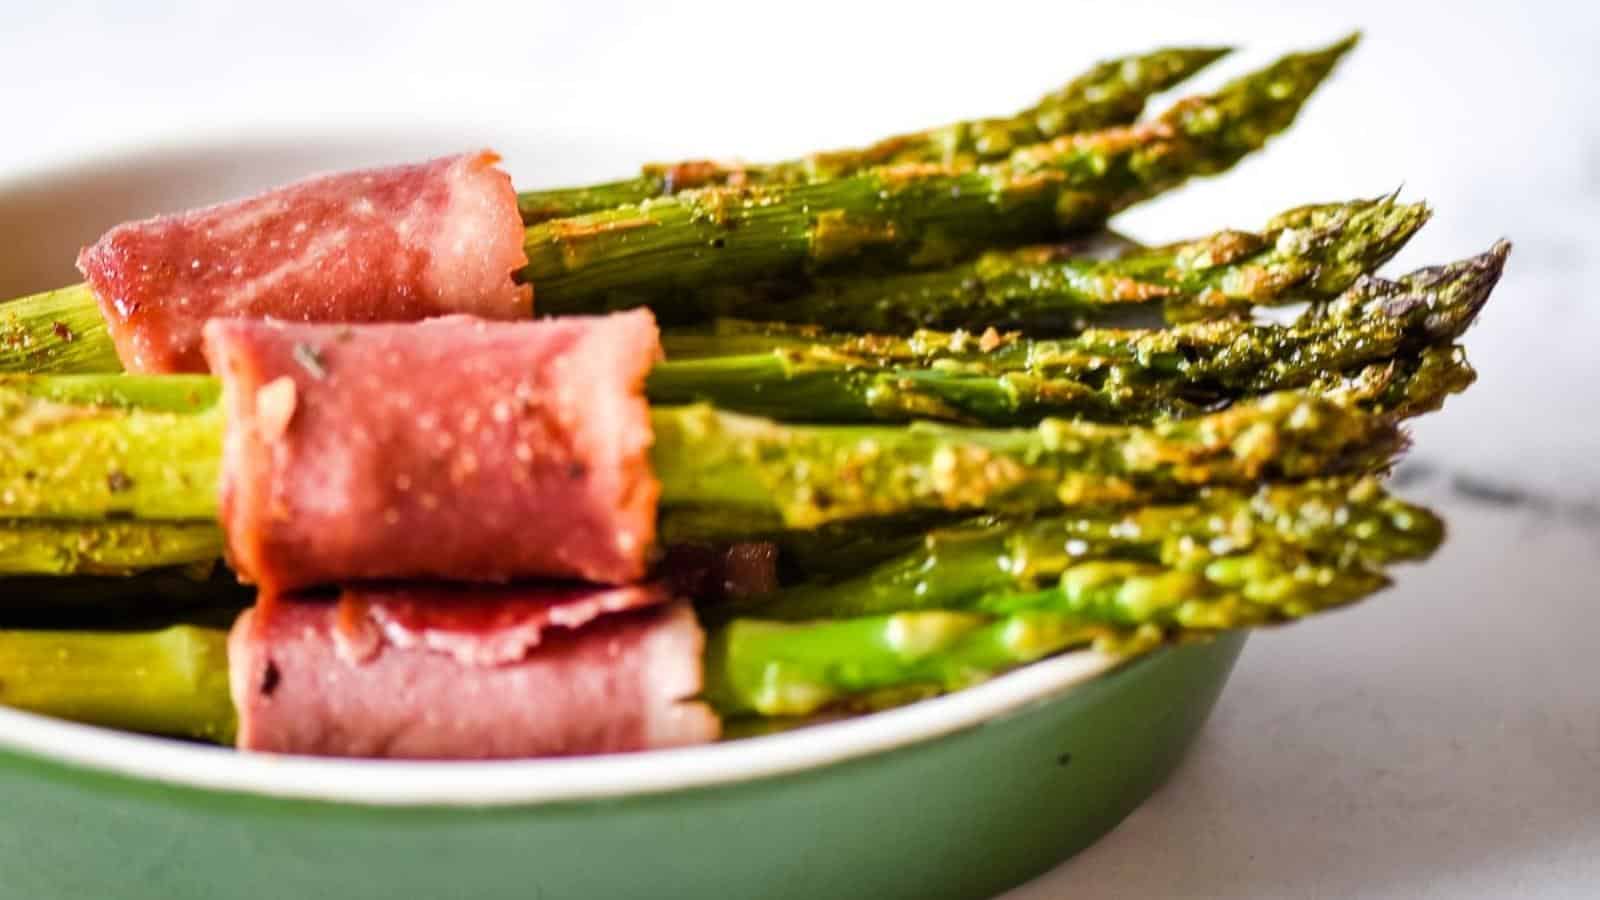 Turkey bacon-wrapped asparagus in a green dish.